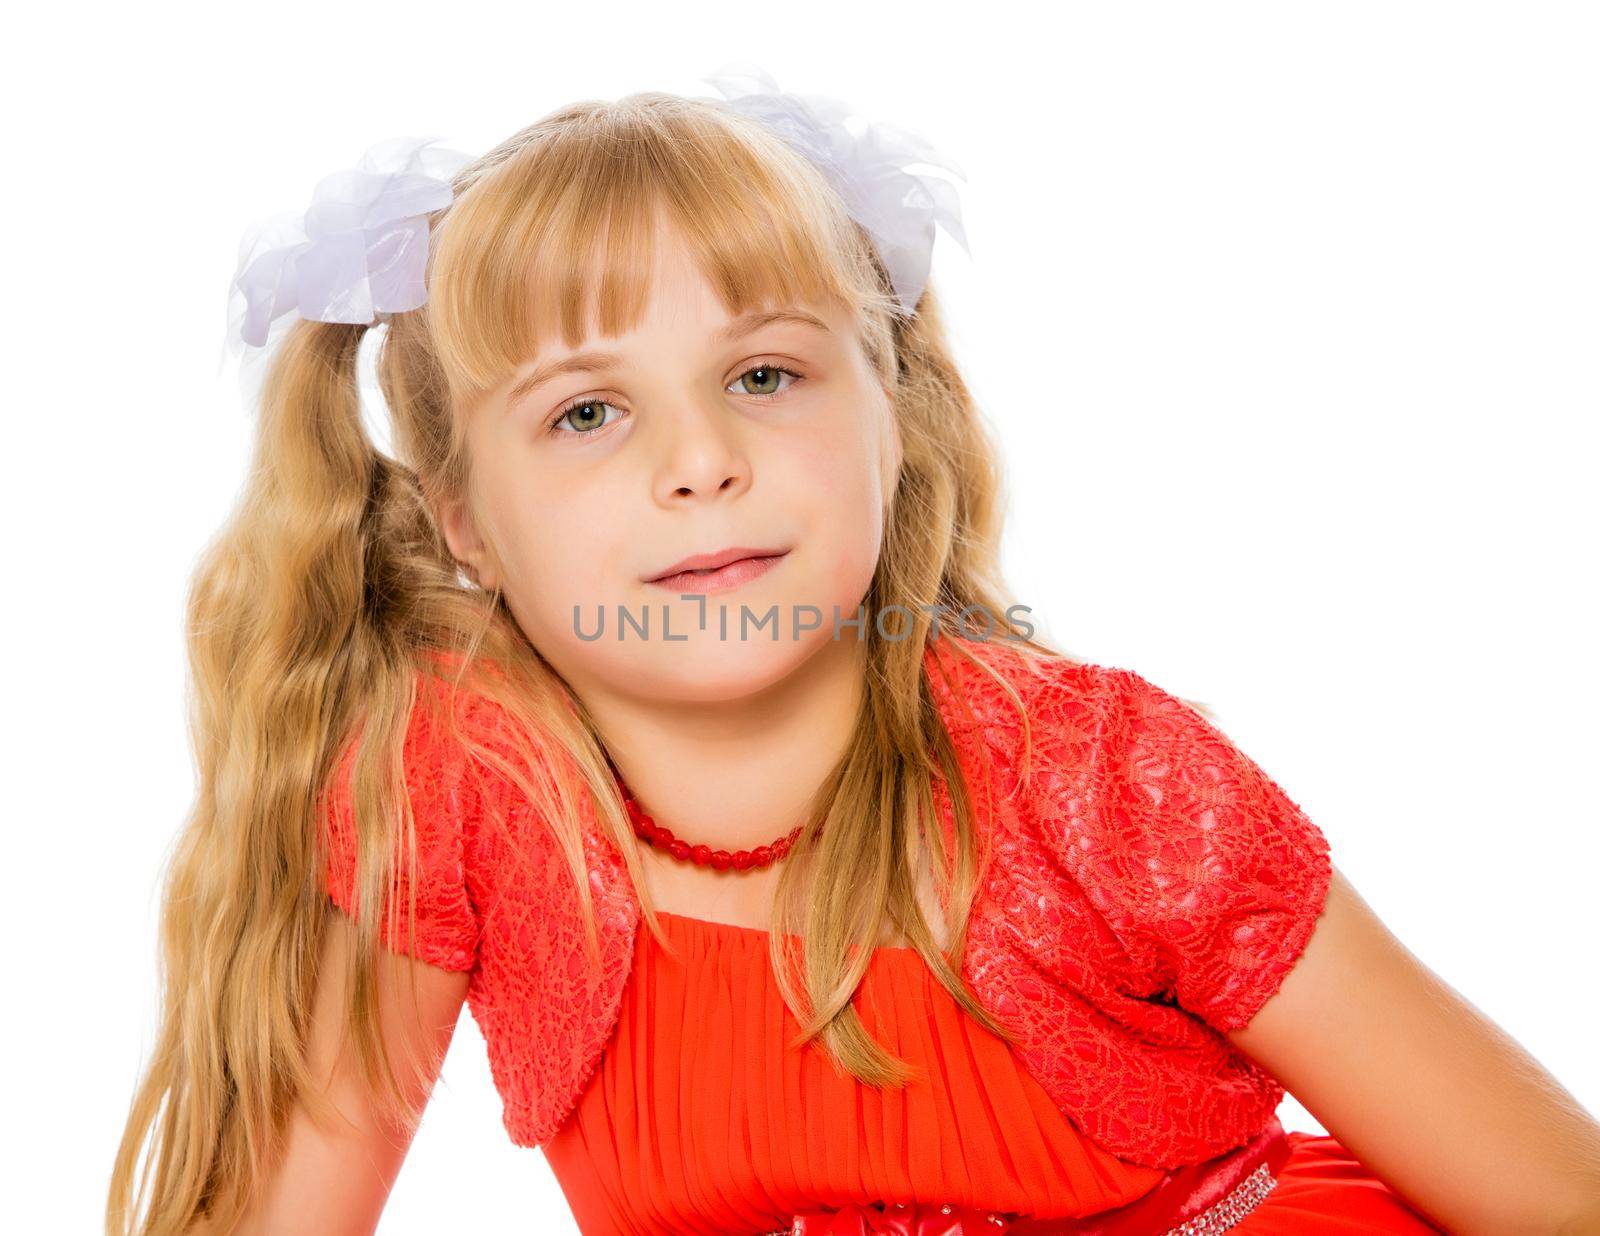 A very beautiful little girl with long, blonde ponytails on her head in a bright orange dress . close-up-Isolated on white background